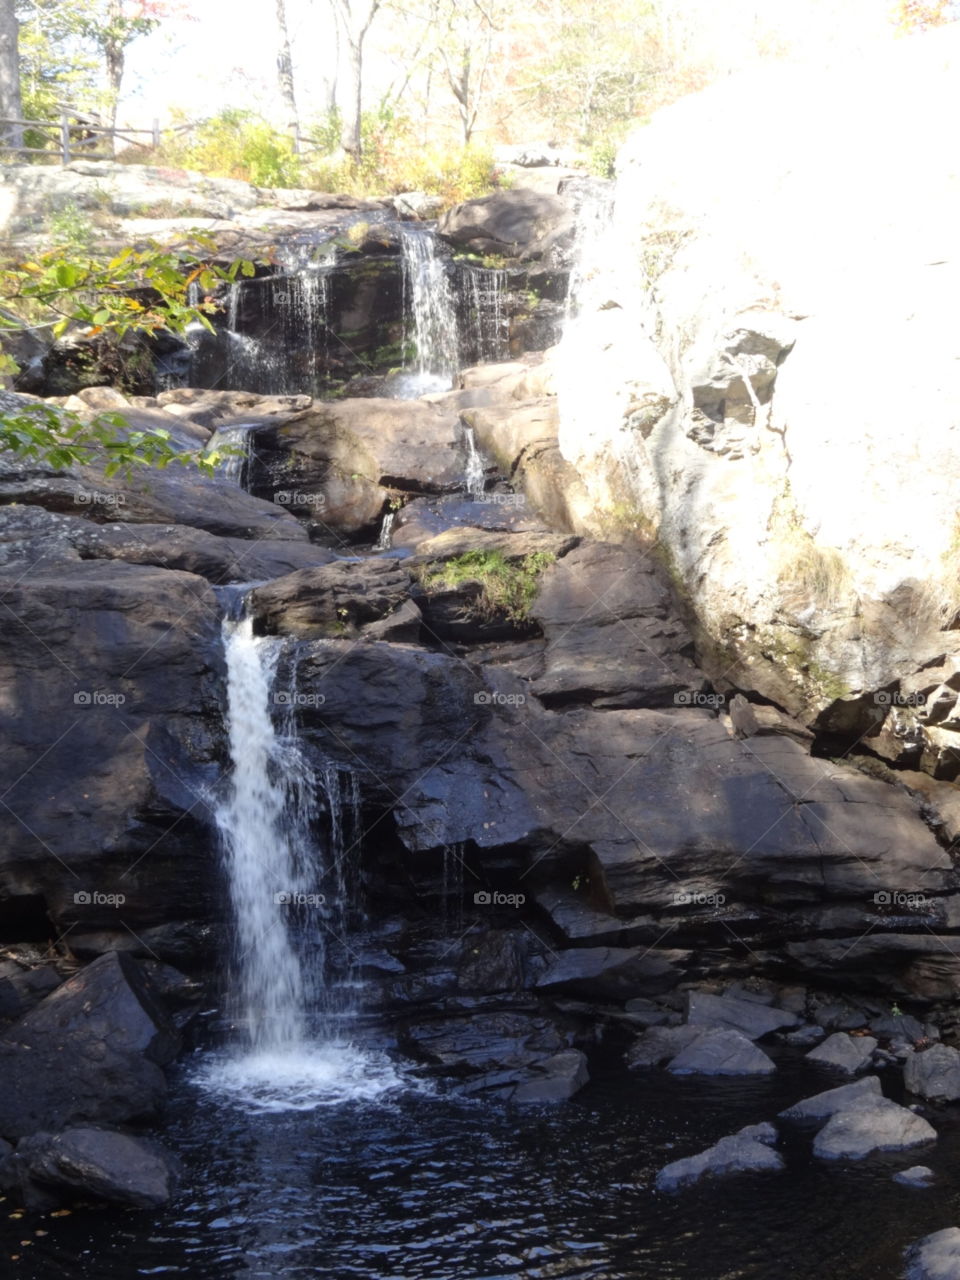 Sunshine and waterfalls makes a perfect day in Connecticut.